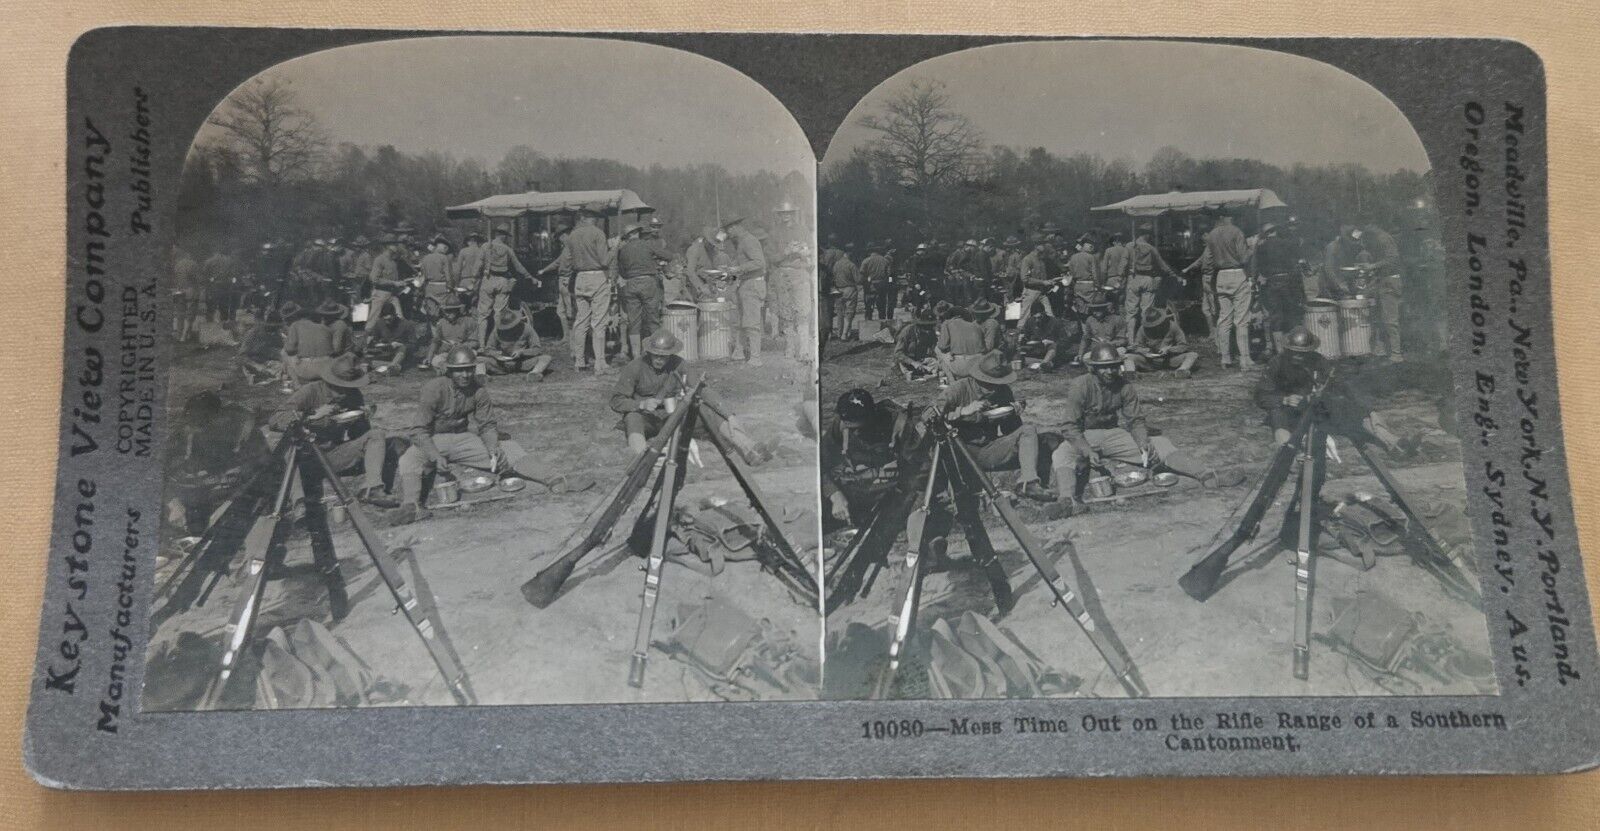 Antique Keystone Soldiers Lining Up For Lunch Mess Stereoview Photo Card KB1 